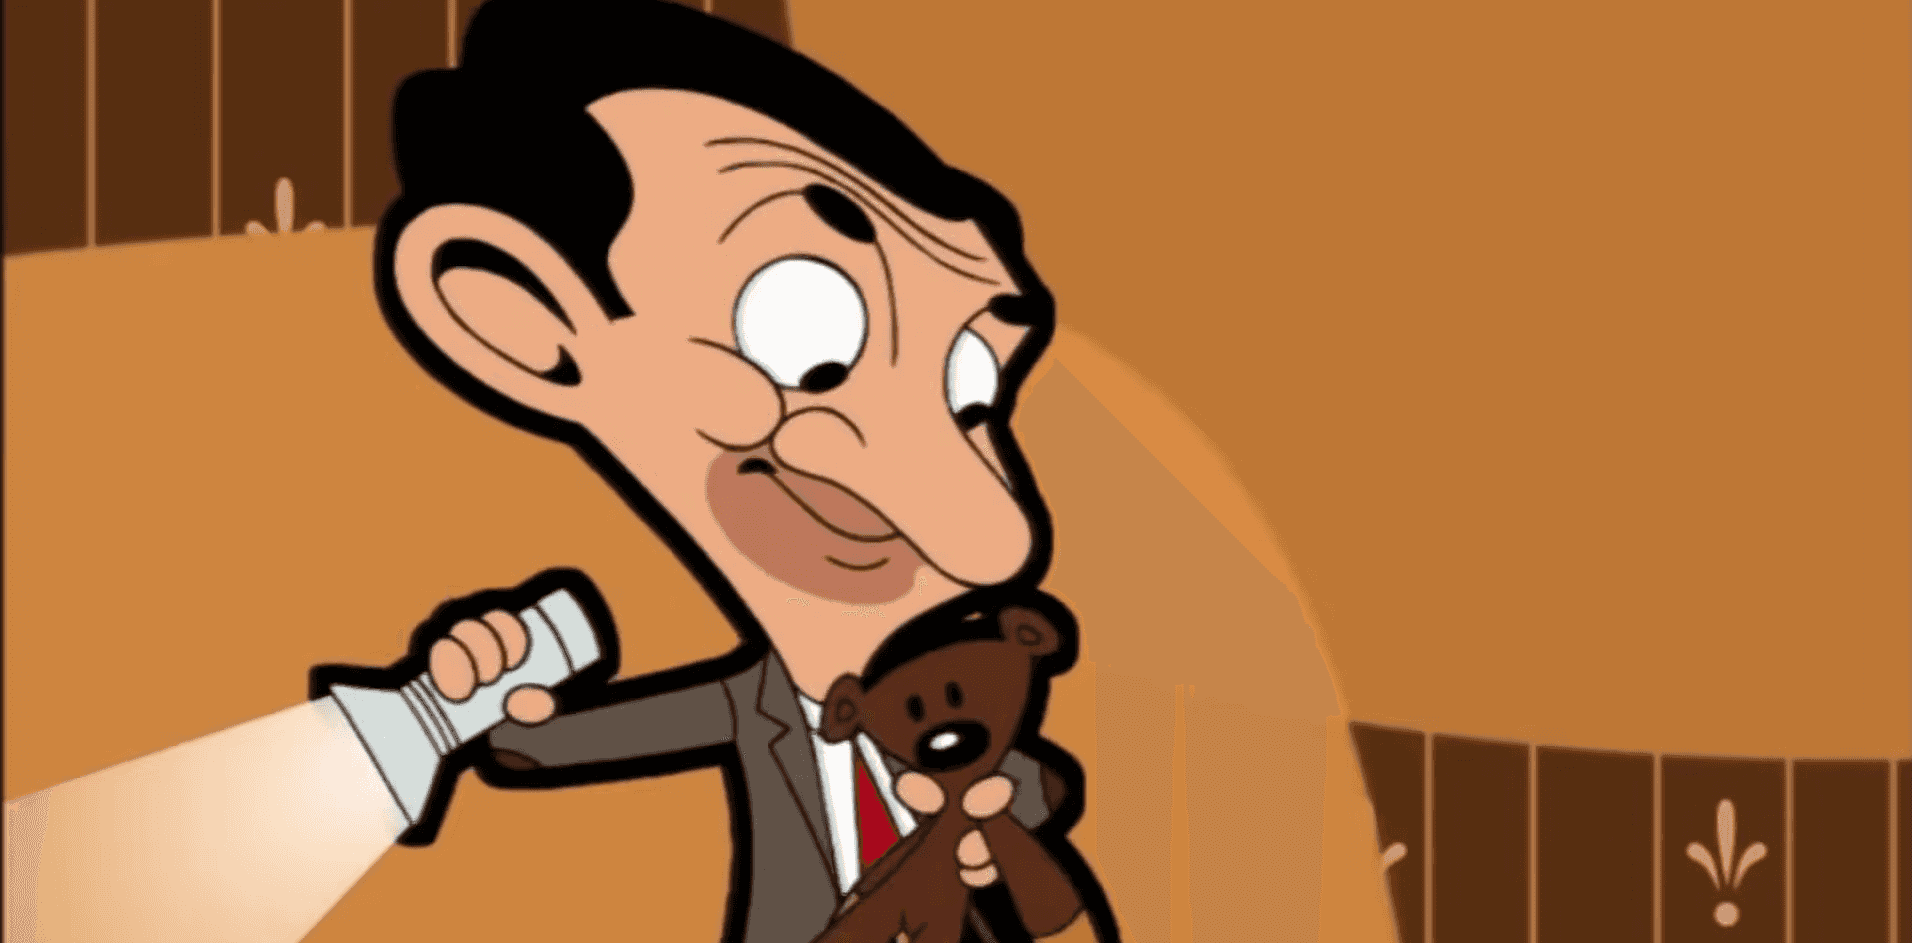 'Mr. Bean' animated series return with new season in 2025